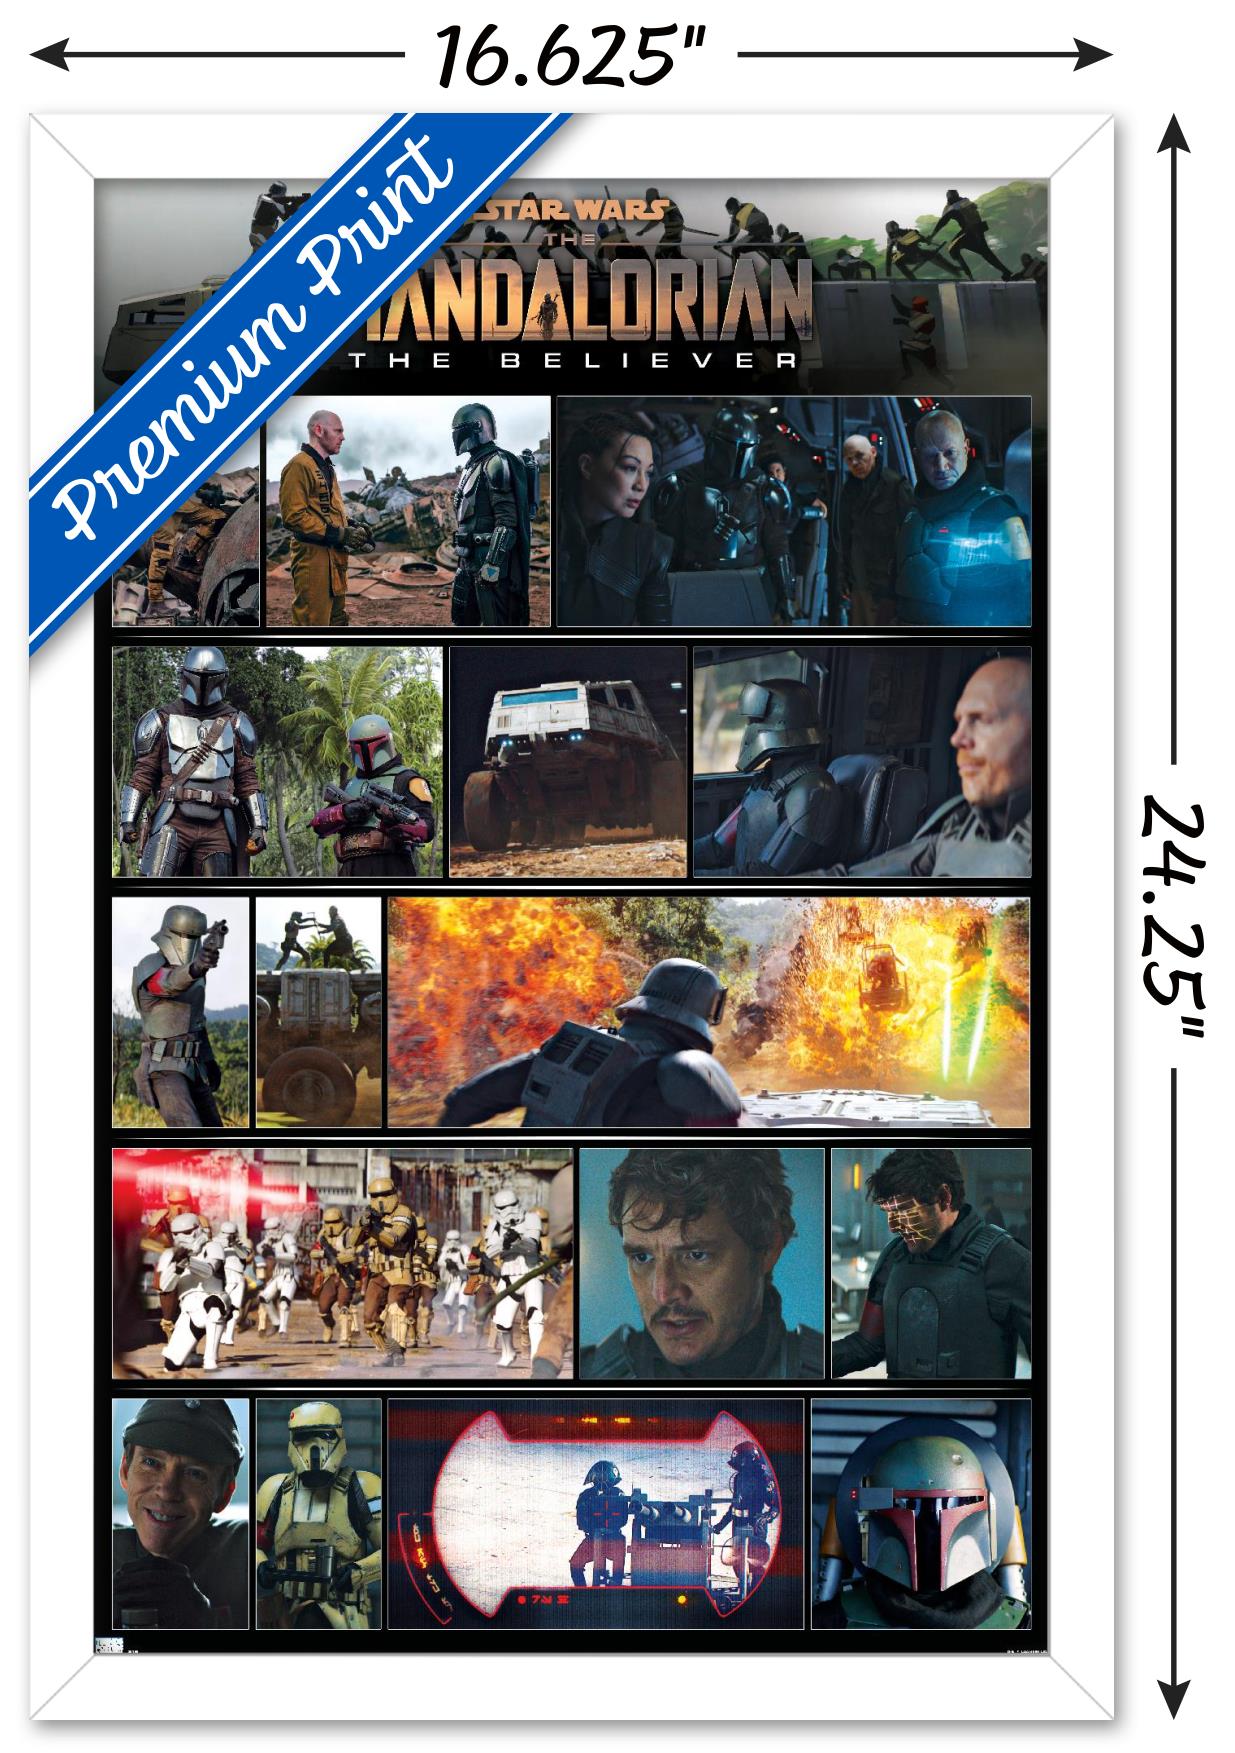 Star Wars: The Mandalorian Season 2 - Chapter 15 Grid Wall Poster, 14.725" x 22.375", Framed - image 3 of 5